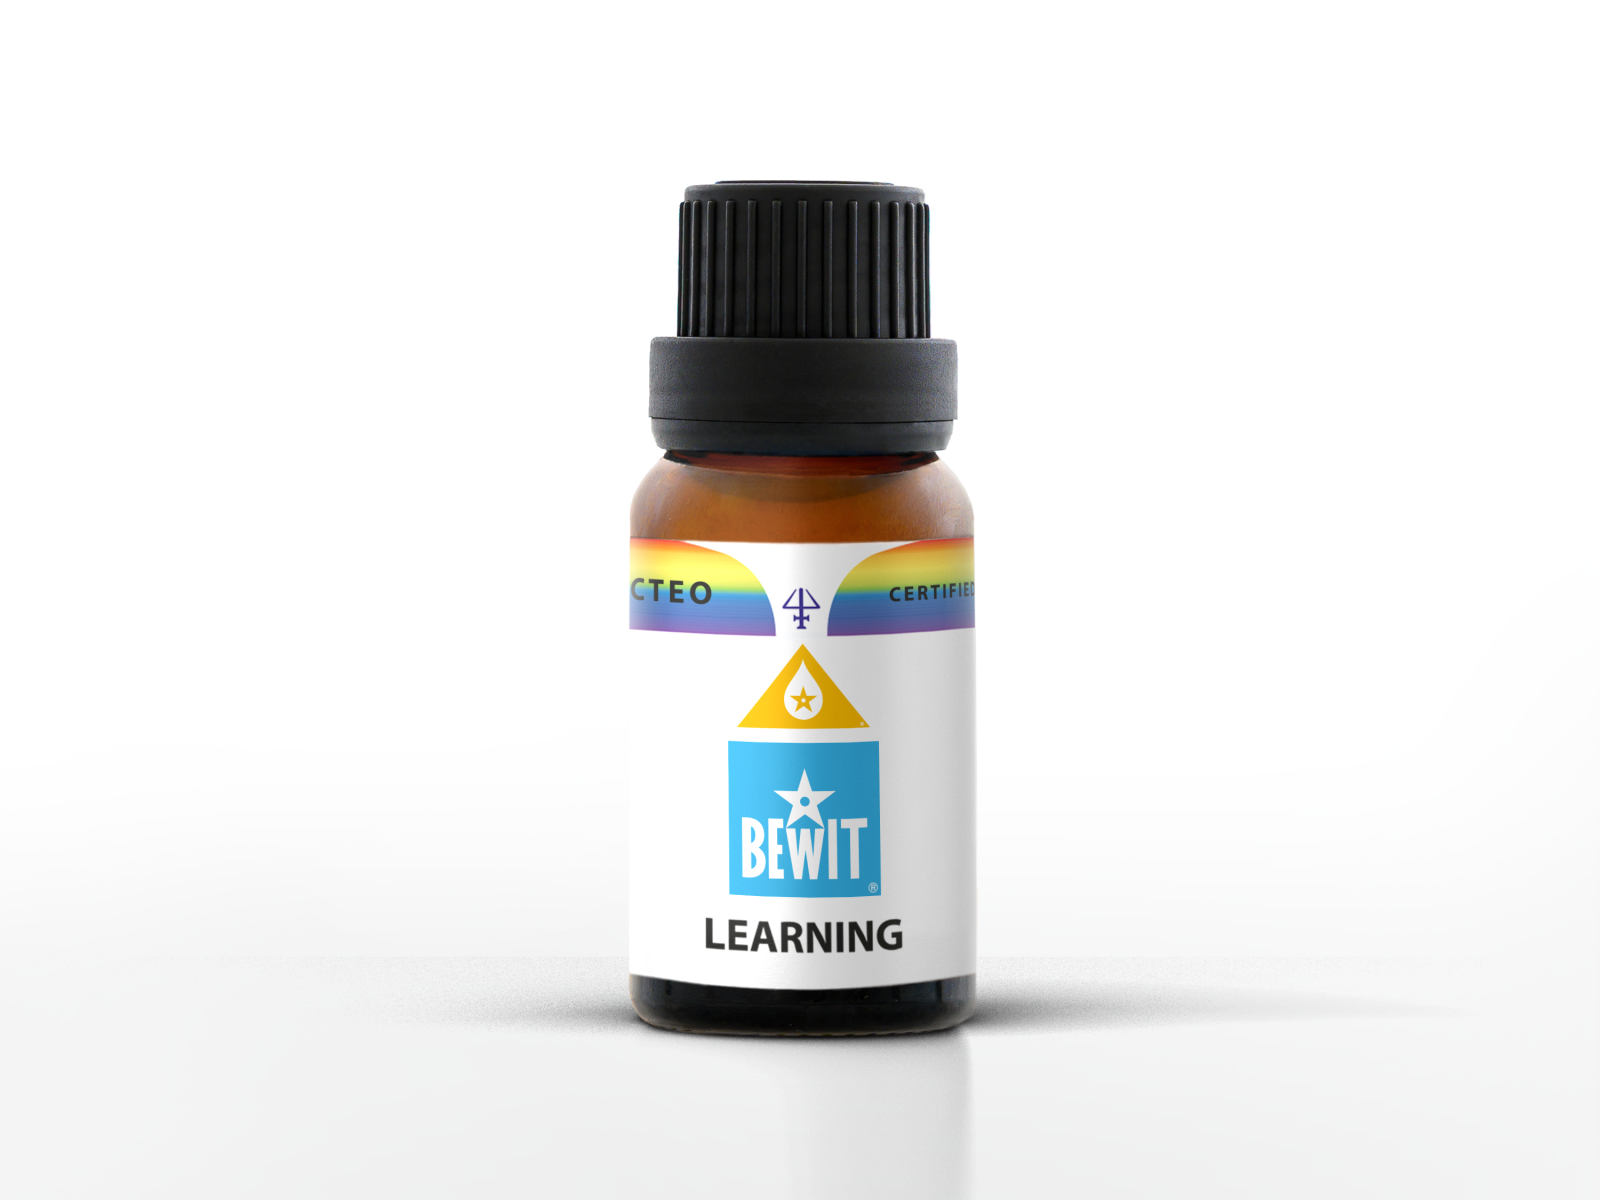 BEWIT LEARNING - 100% natural essential oil blend in CTEO® quality - 1